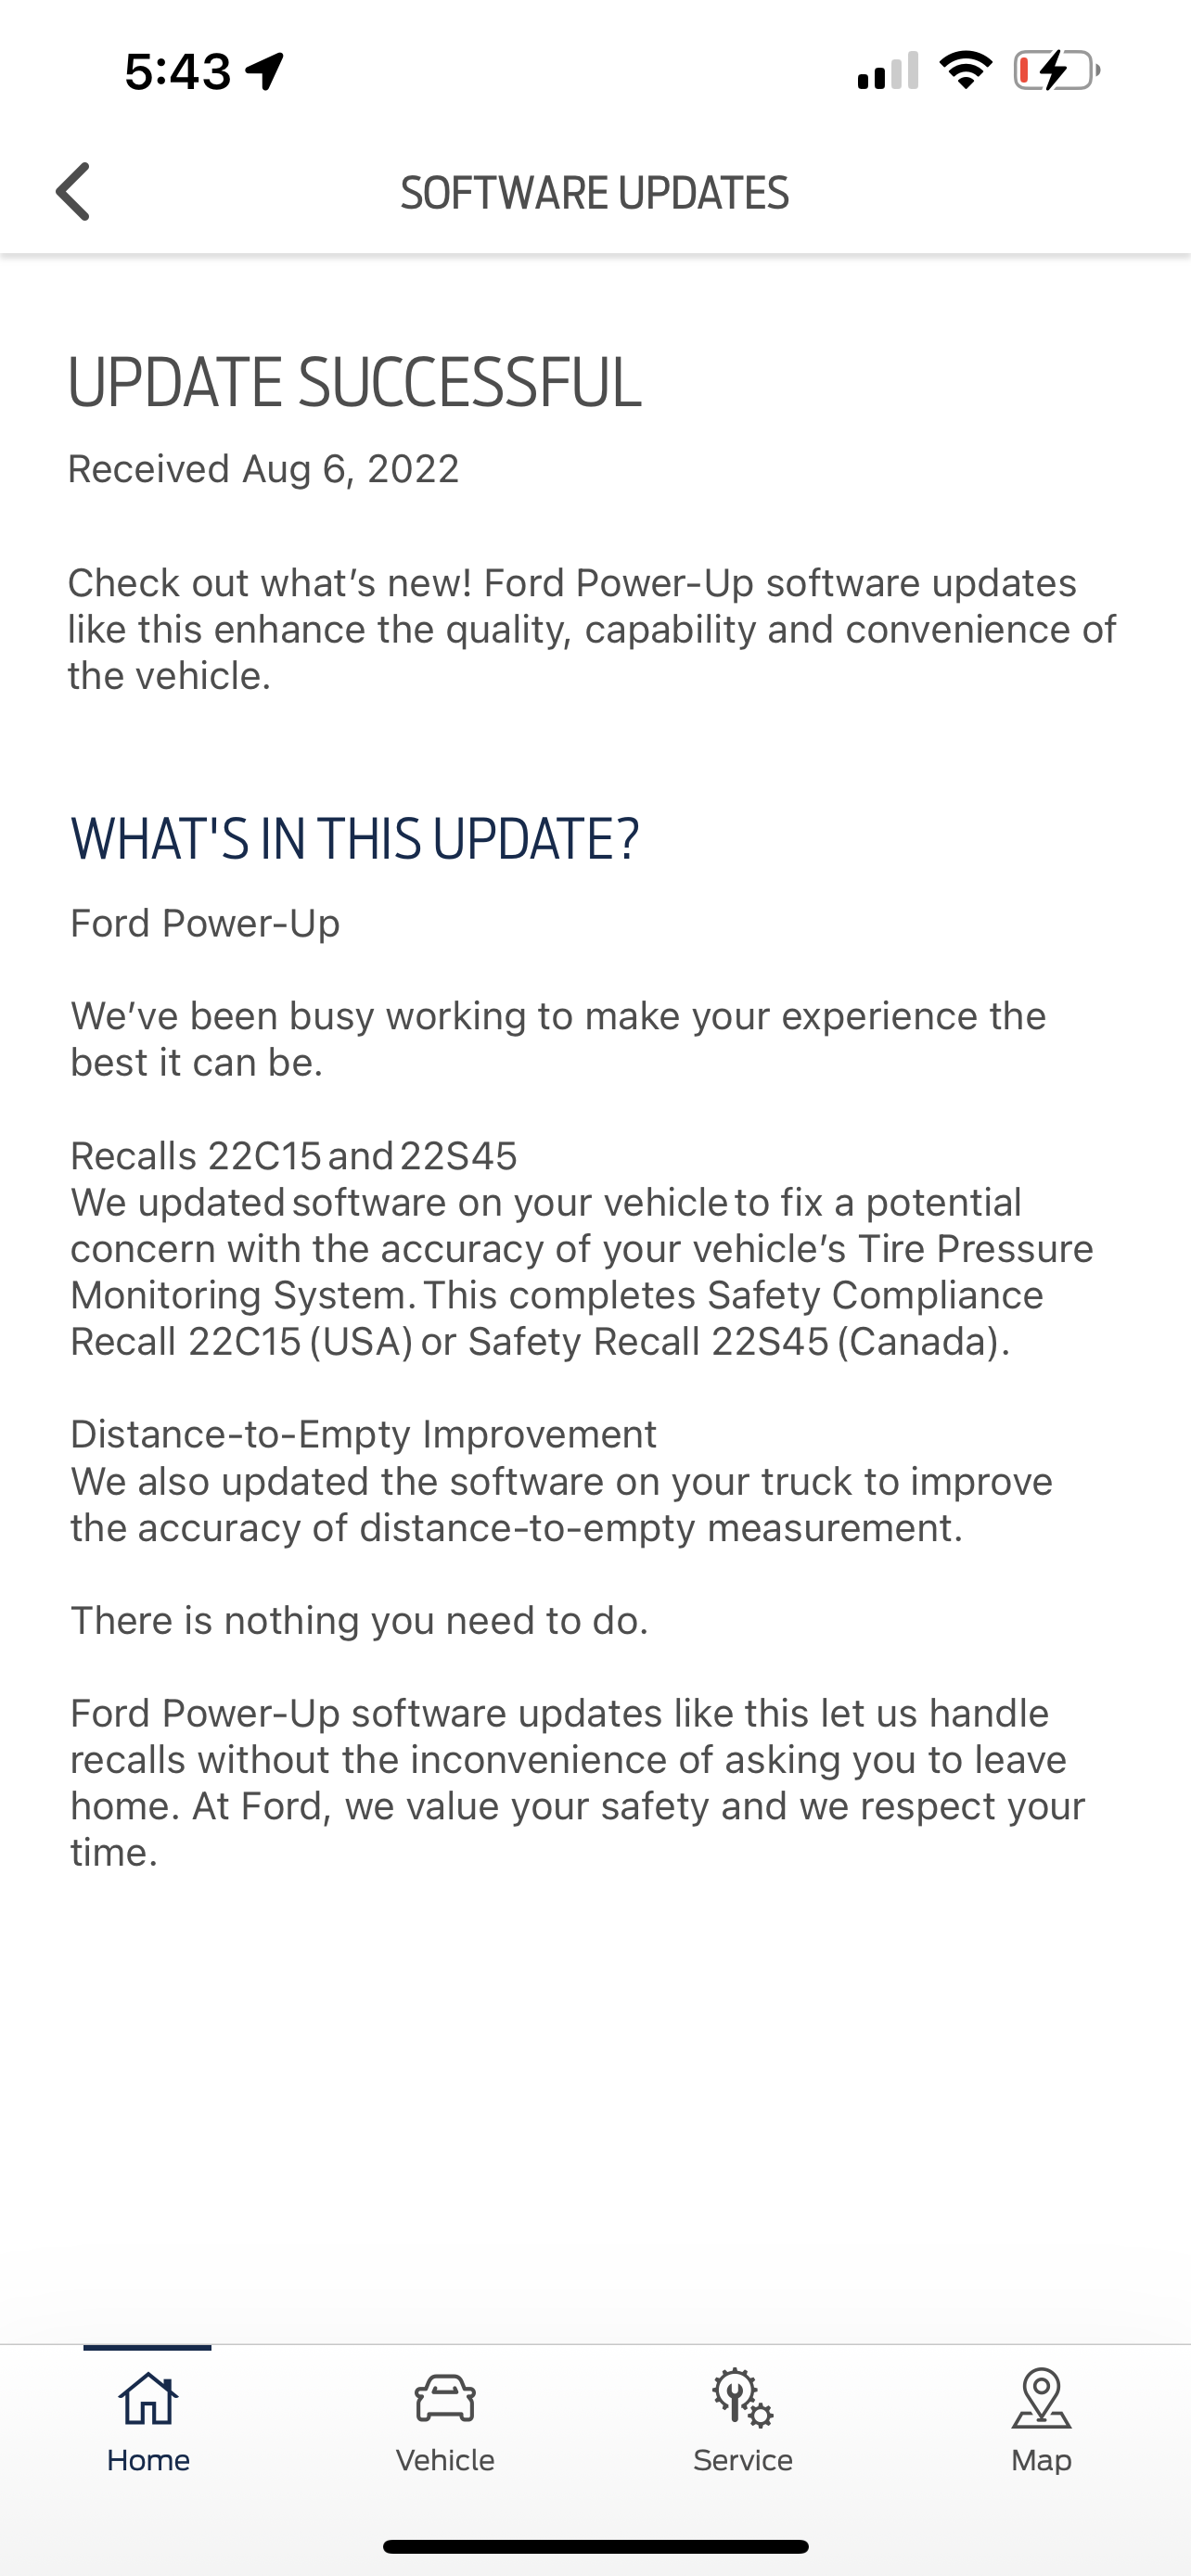 Ford F-150 Lightning PowerUp Recall update and DTE improvements 8/6/2022 75A66472-6810-4DC1-B6C5-65B222ABFF54